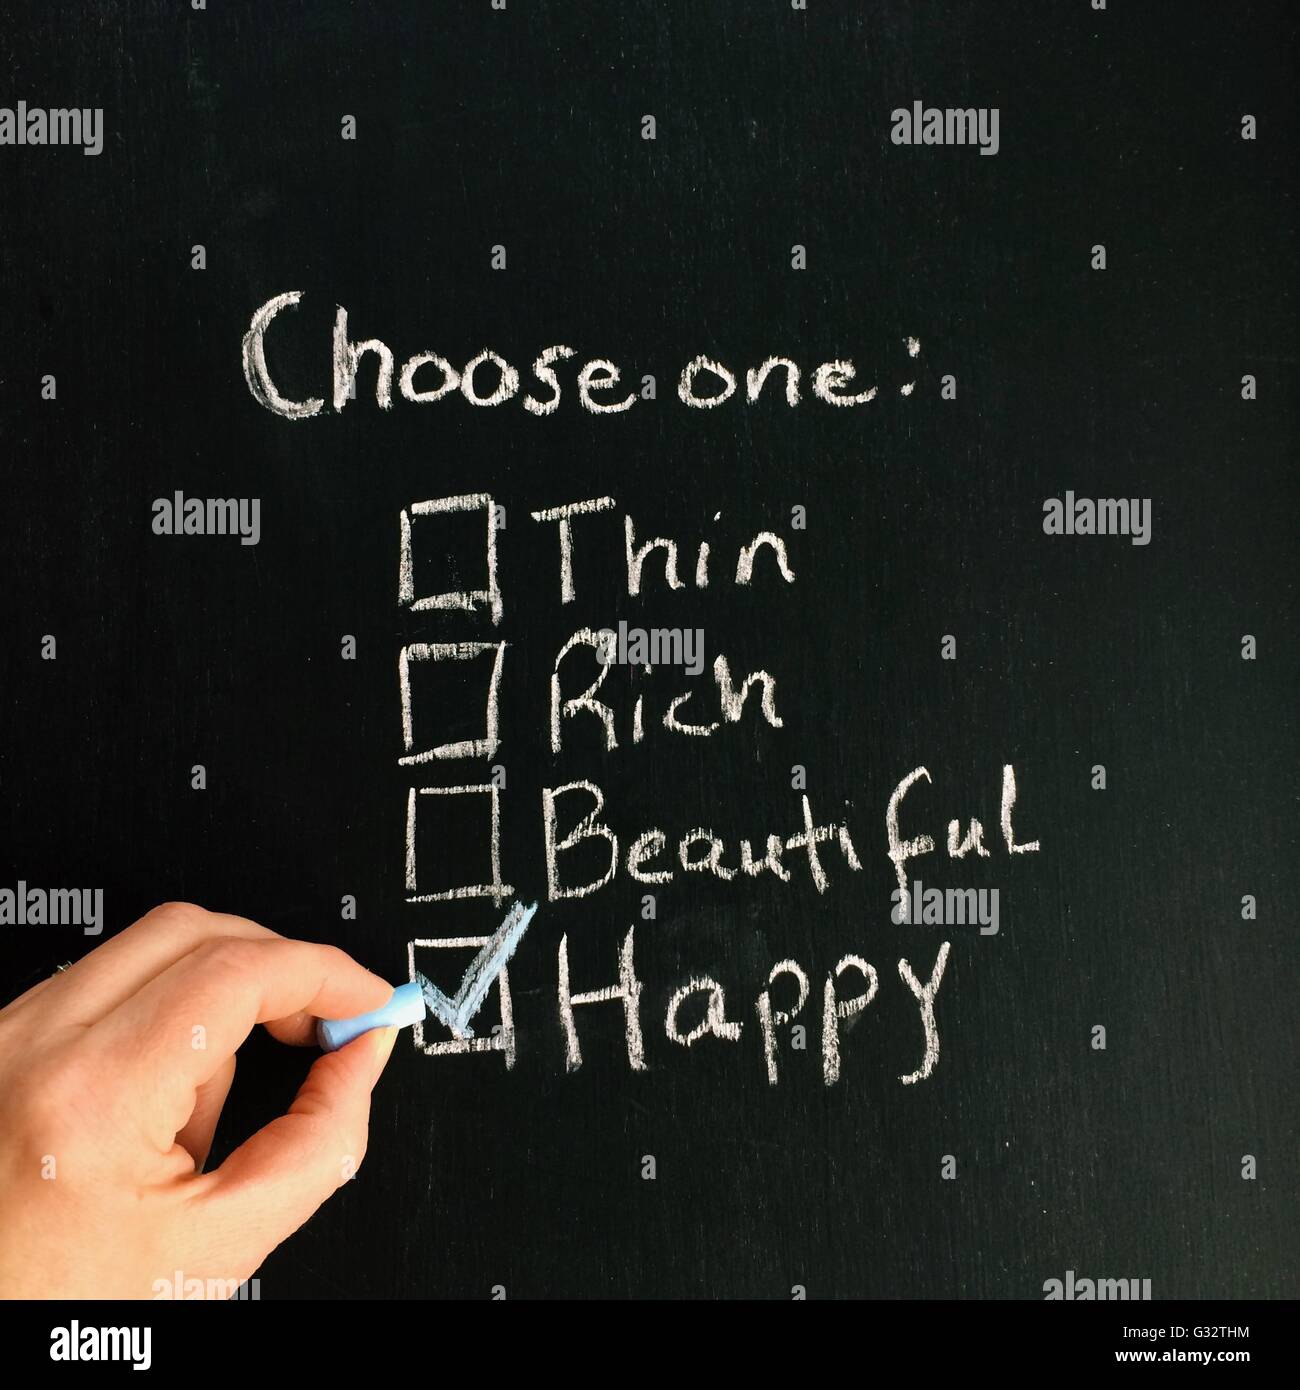 Hand writing List of choices on blackboard: thin, rich, beautiful, happy Stock Photo